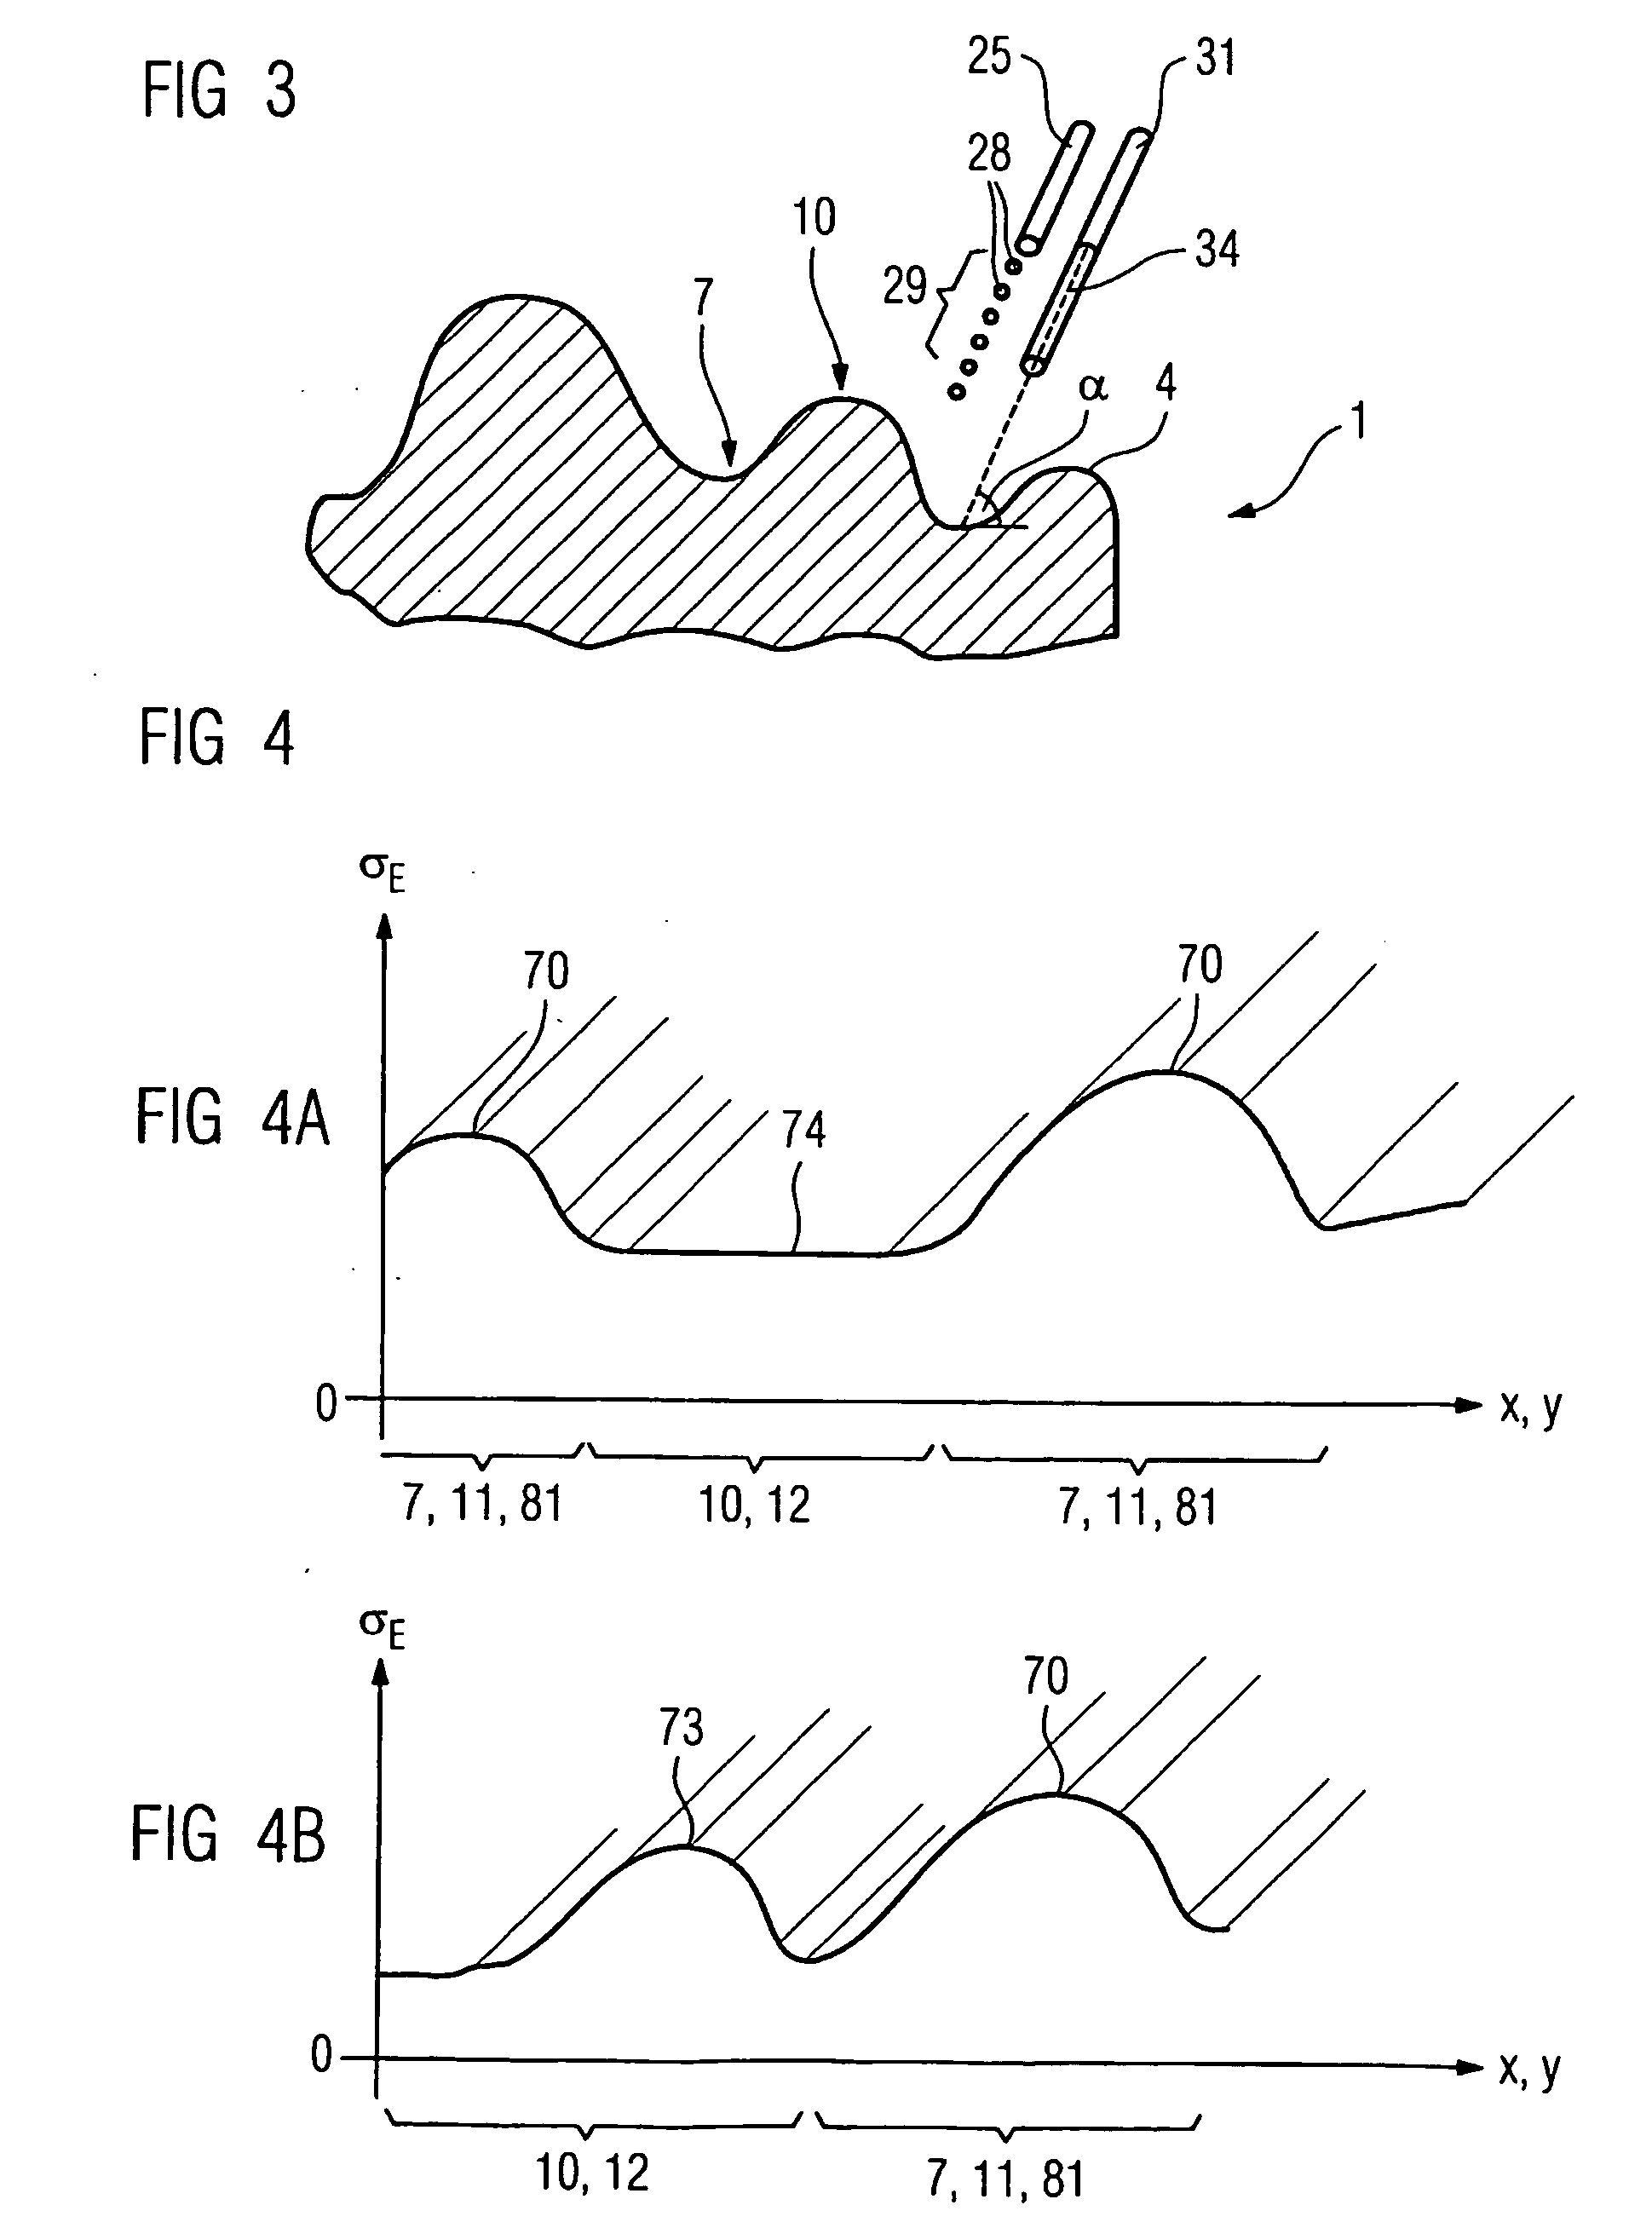 Component With Compressive Residual Stresses, Process For Producing And Apparatus For Generating Compressive Residual Stresses